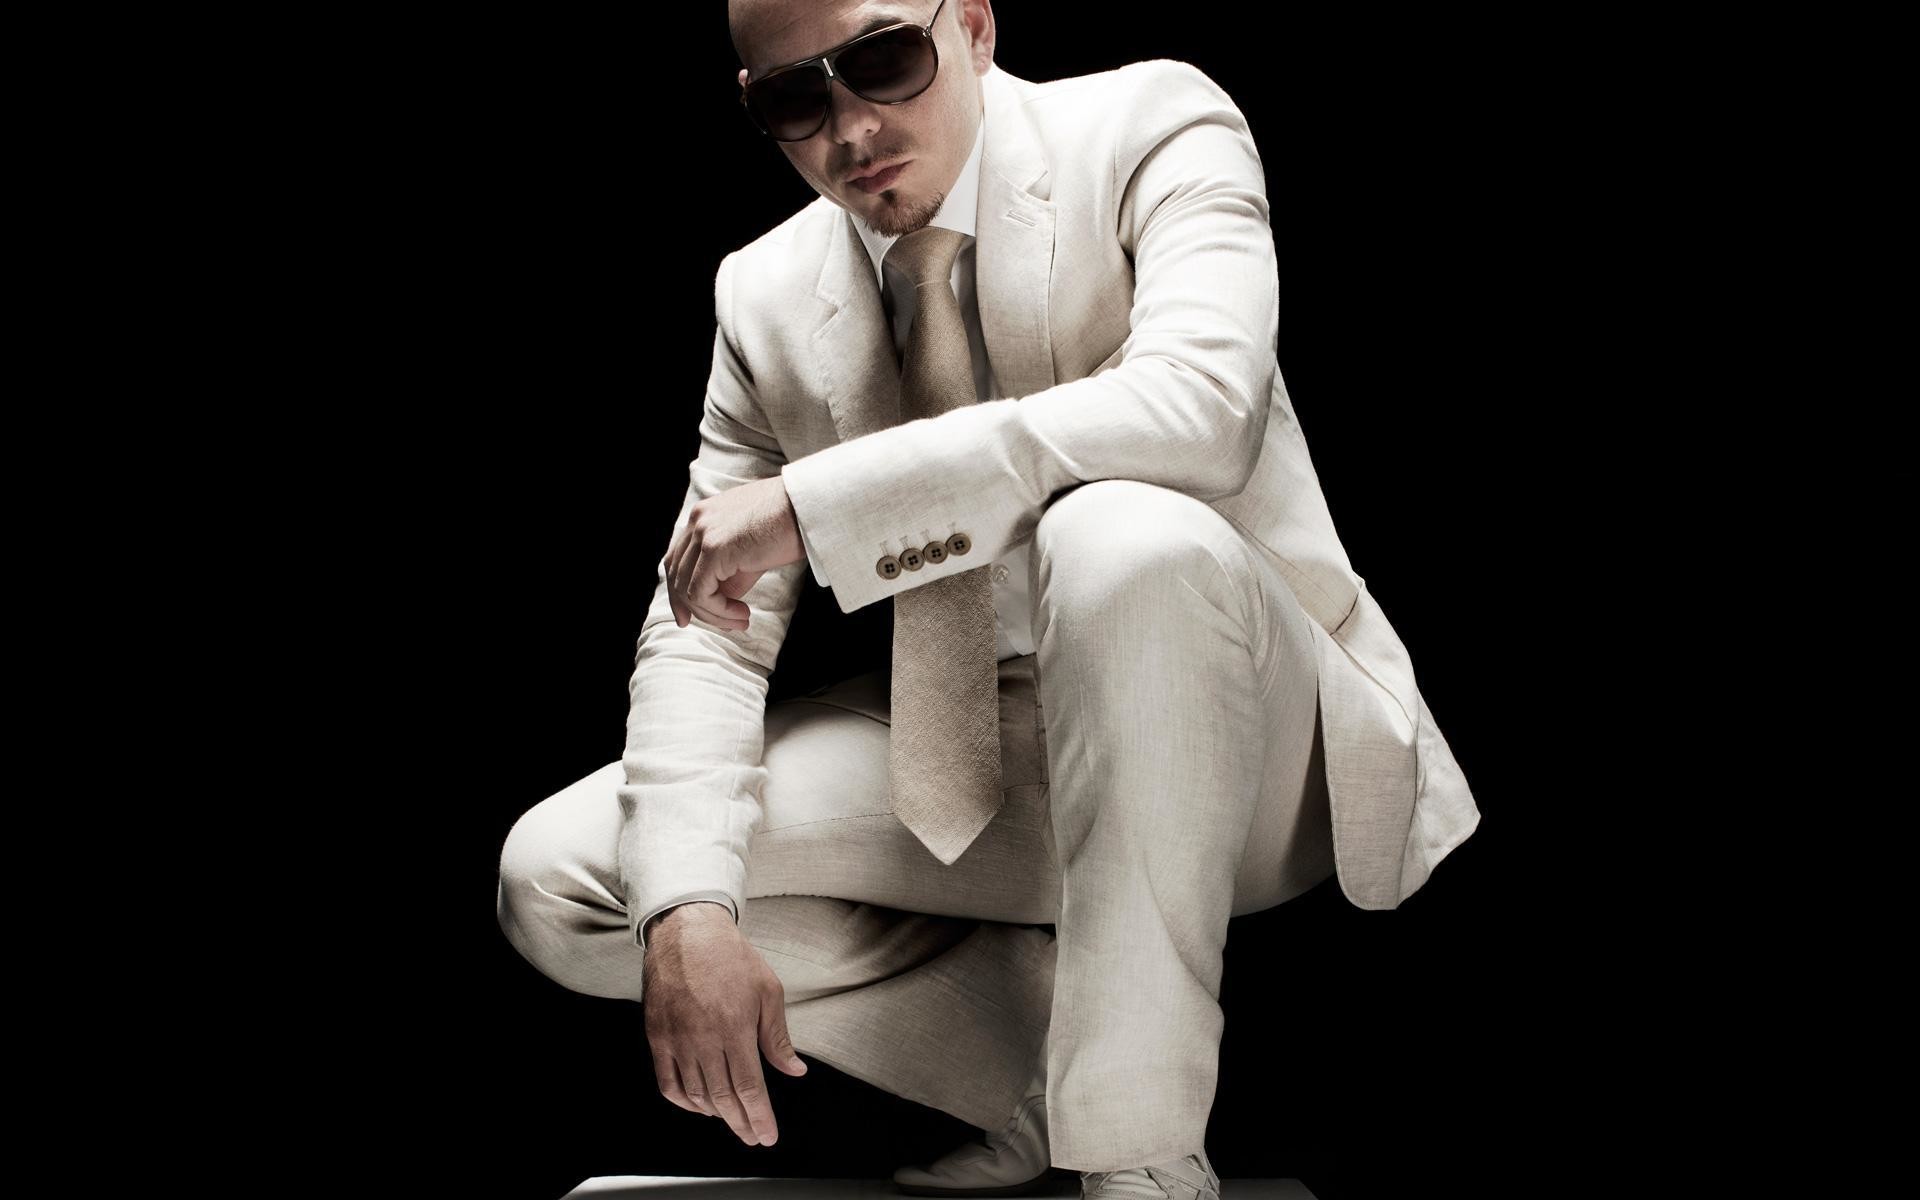 1920x1200 Wallpapers of singer Pitbull in high definition